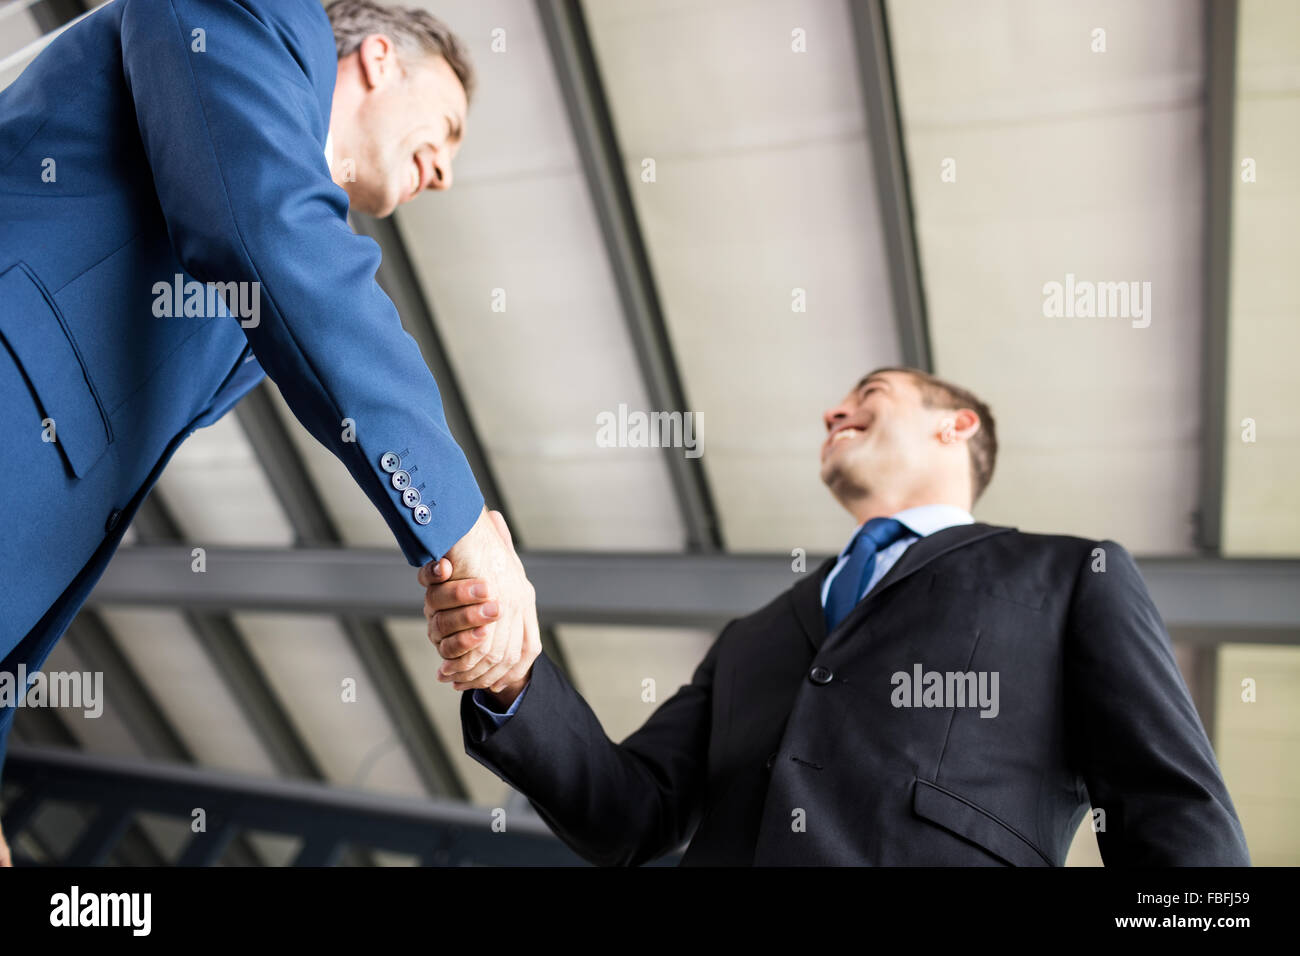 Two smiling businessmen shaking hands Stock Photo